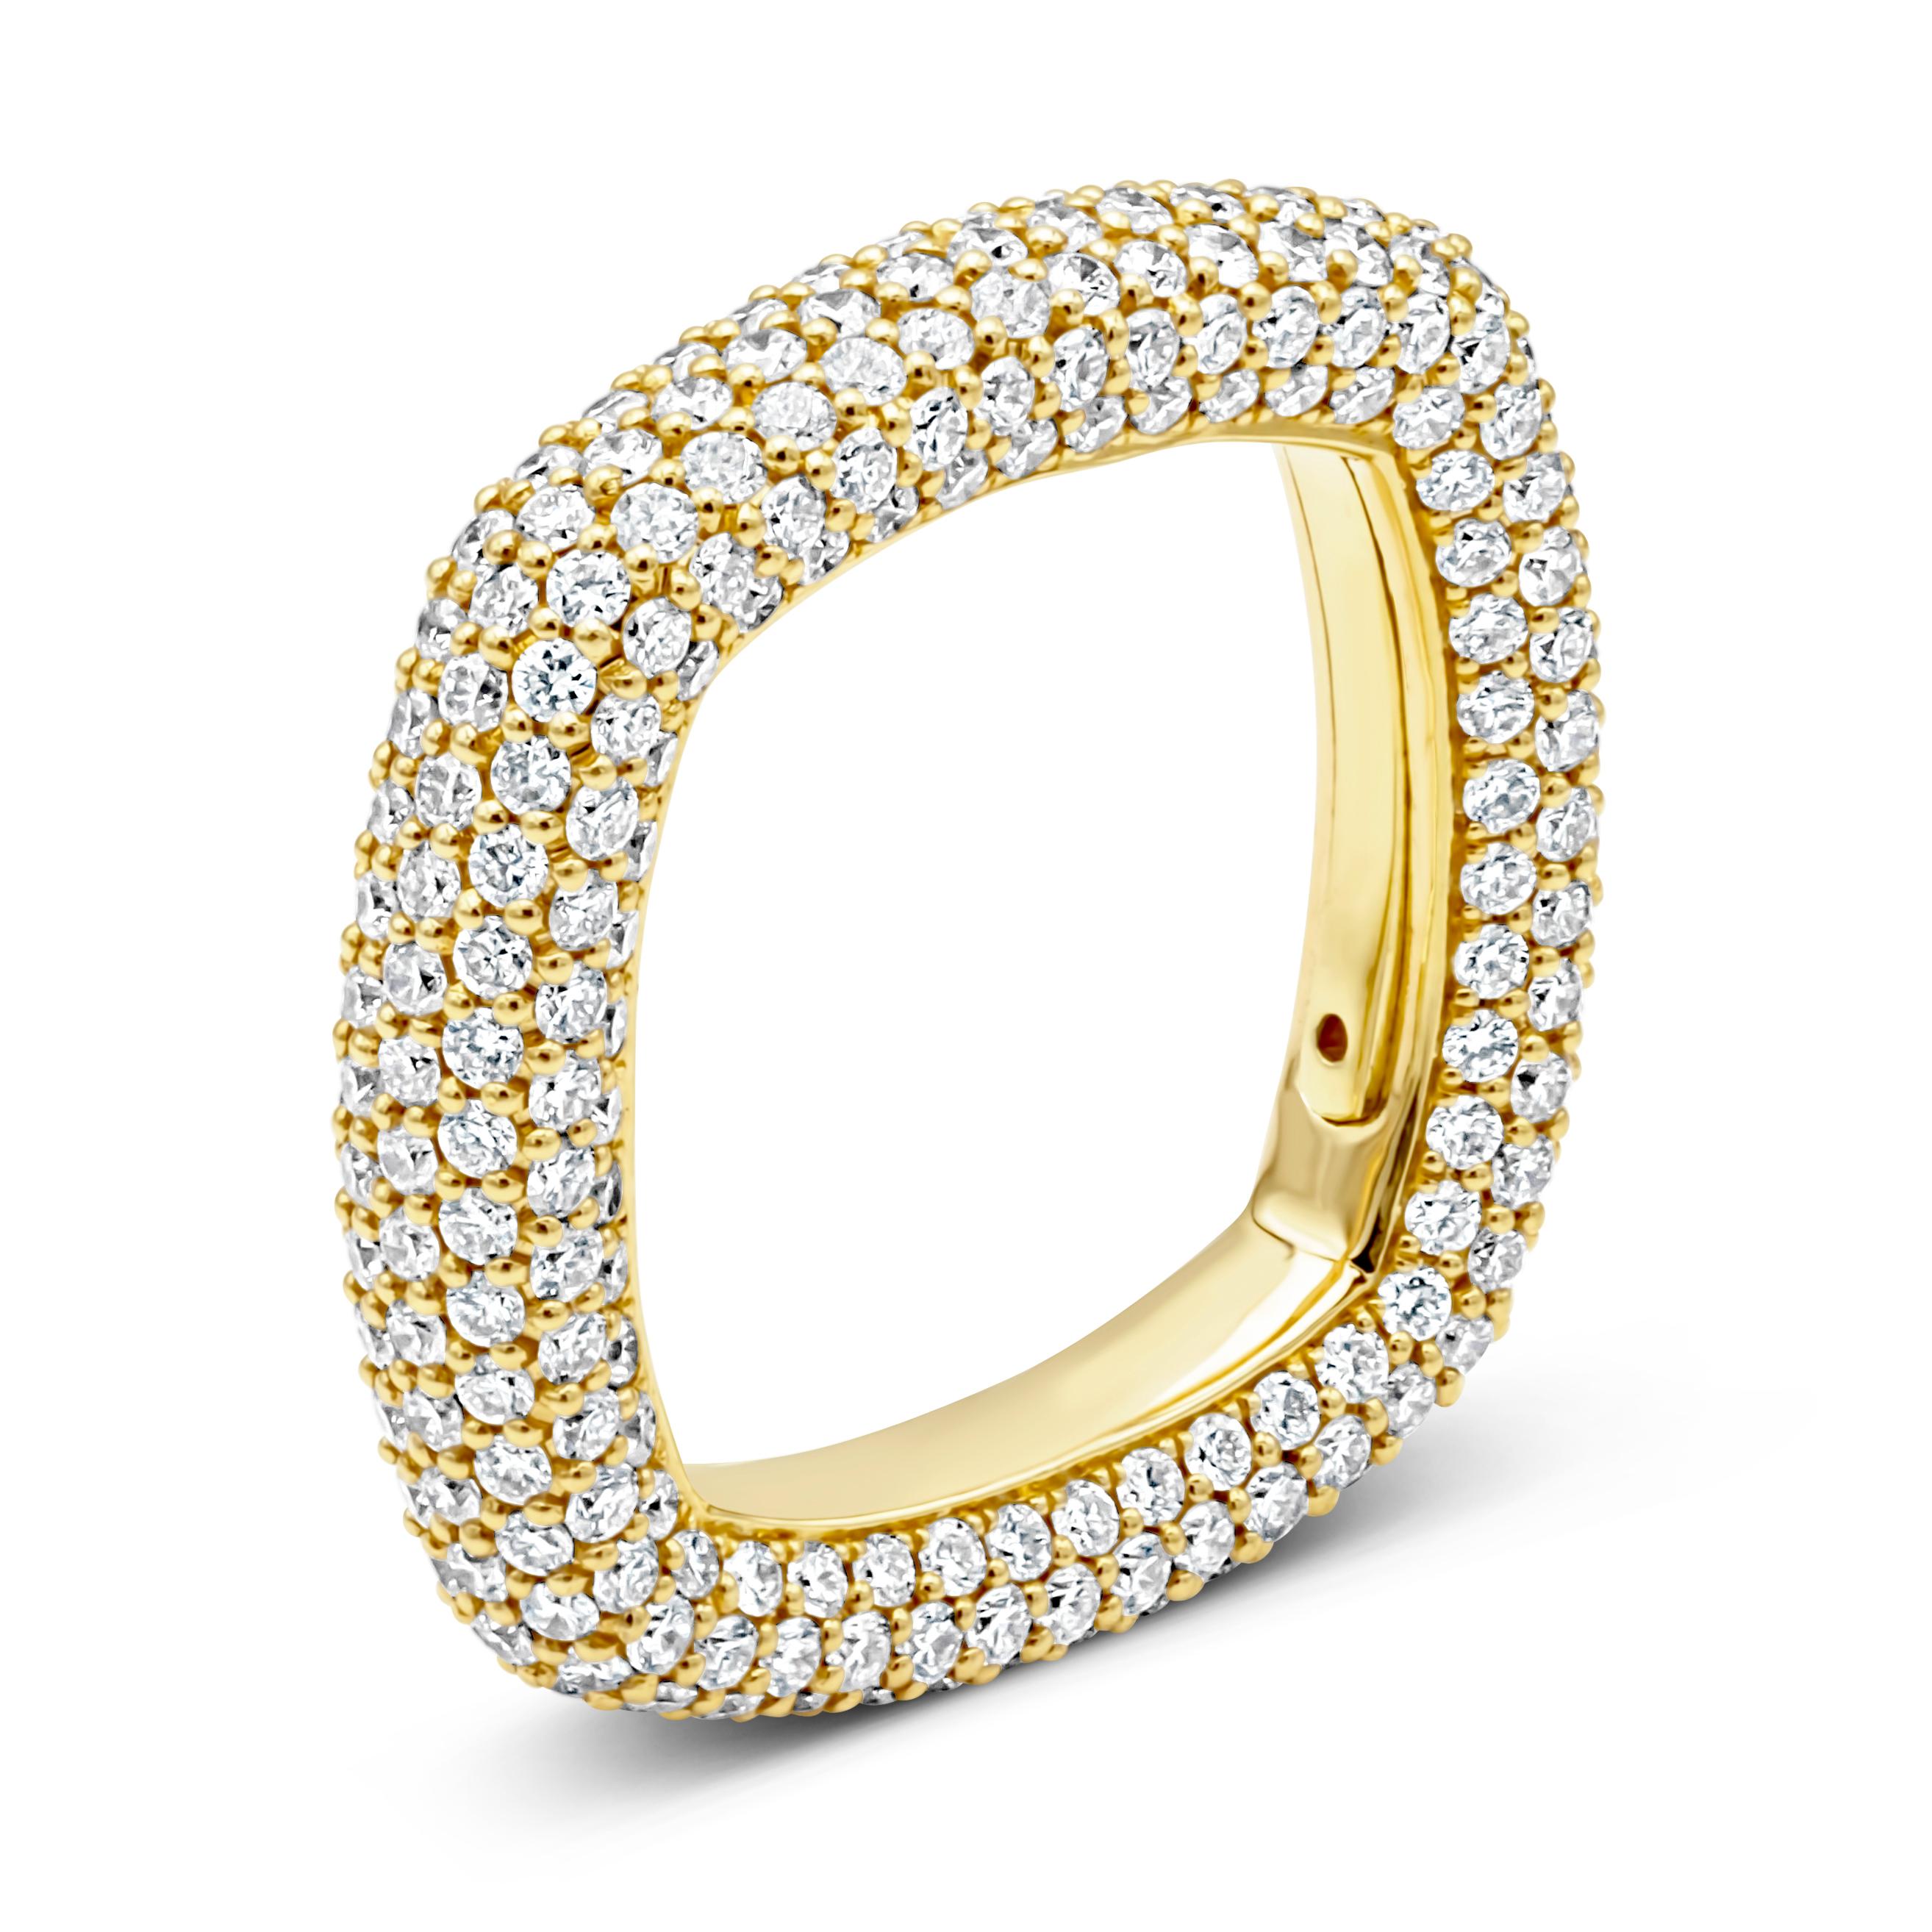 This fascinating and stylish fashion ring showcases 340 brilliant round cut diamonds weighing 3.30 carats total, beautifully set in a micro-pave set square design and shared prong setting. Perfectly made in 18k yellow gold. Size 6.5 US resizable